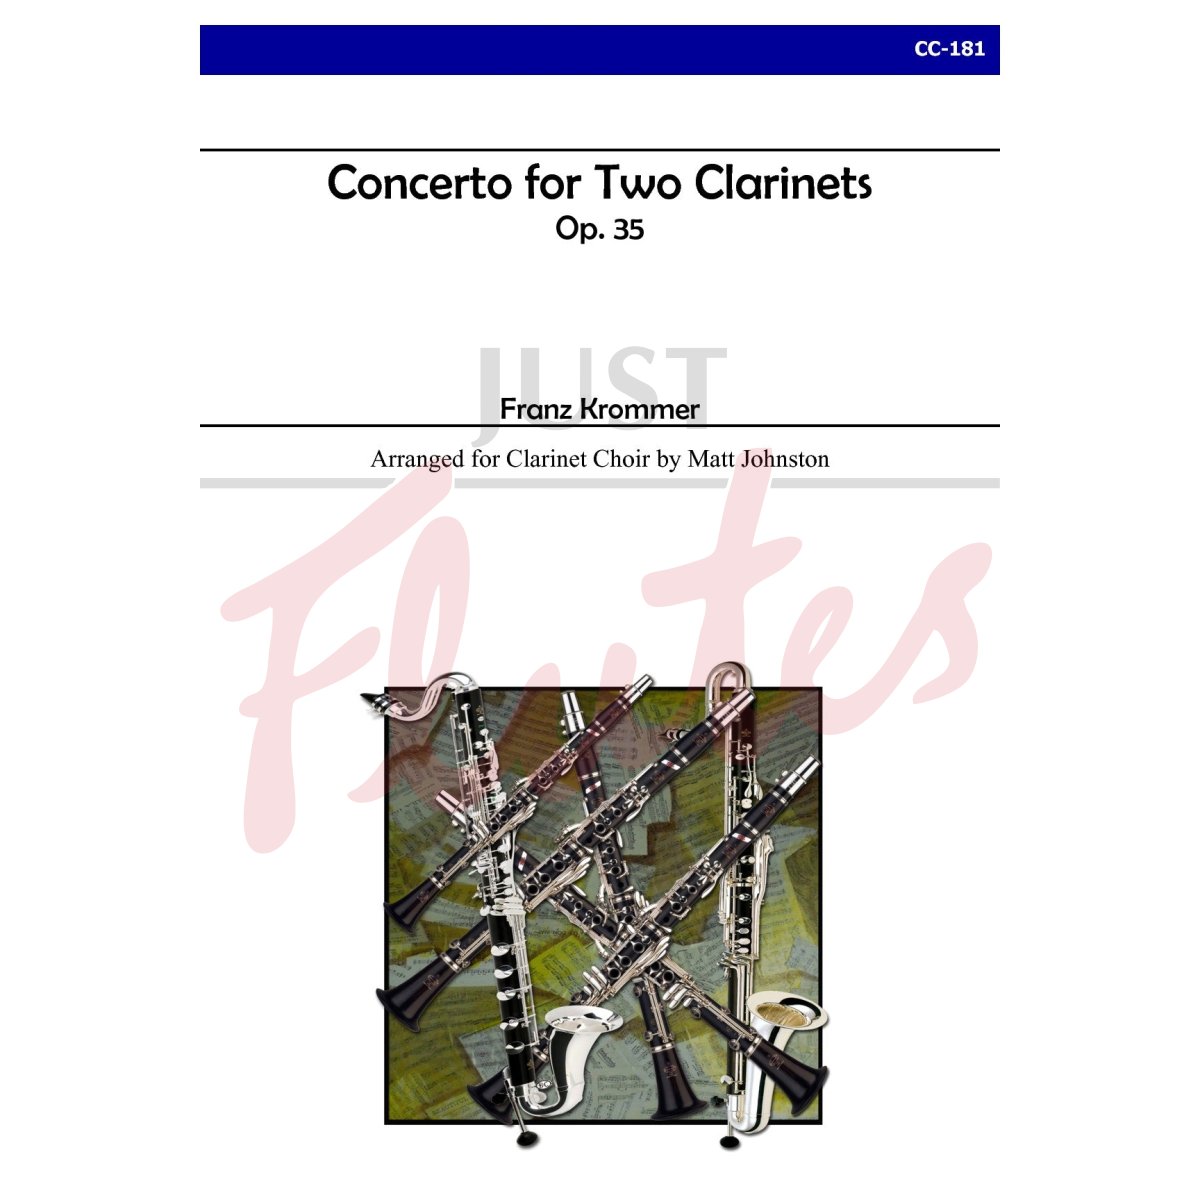 Concerto for Two Clarinets arranged for Clarinet Choir